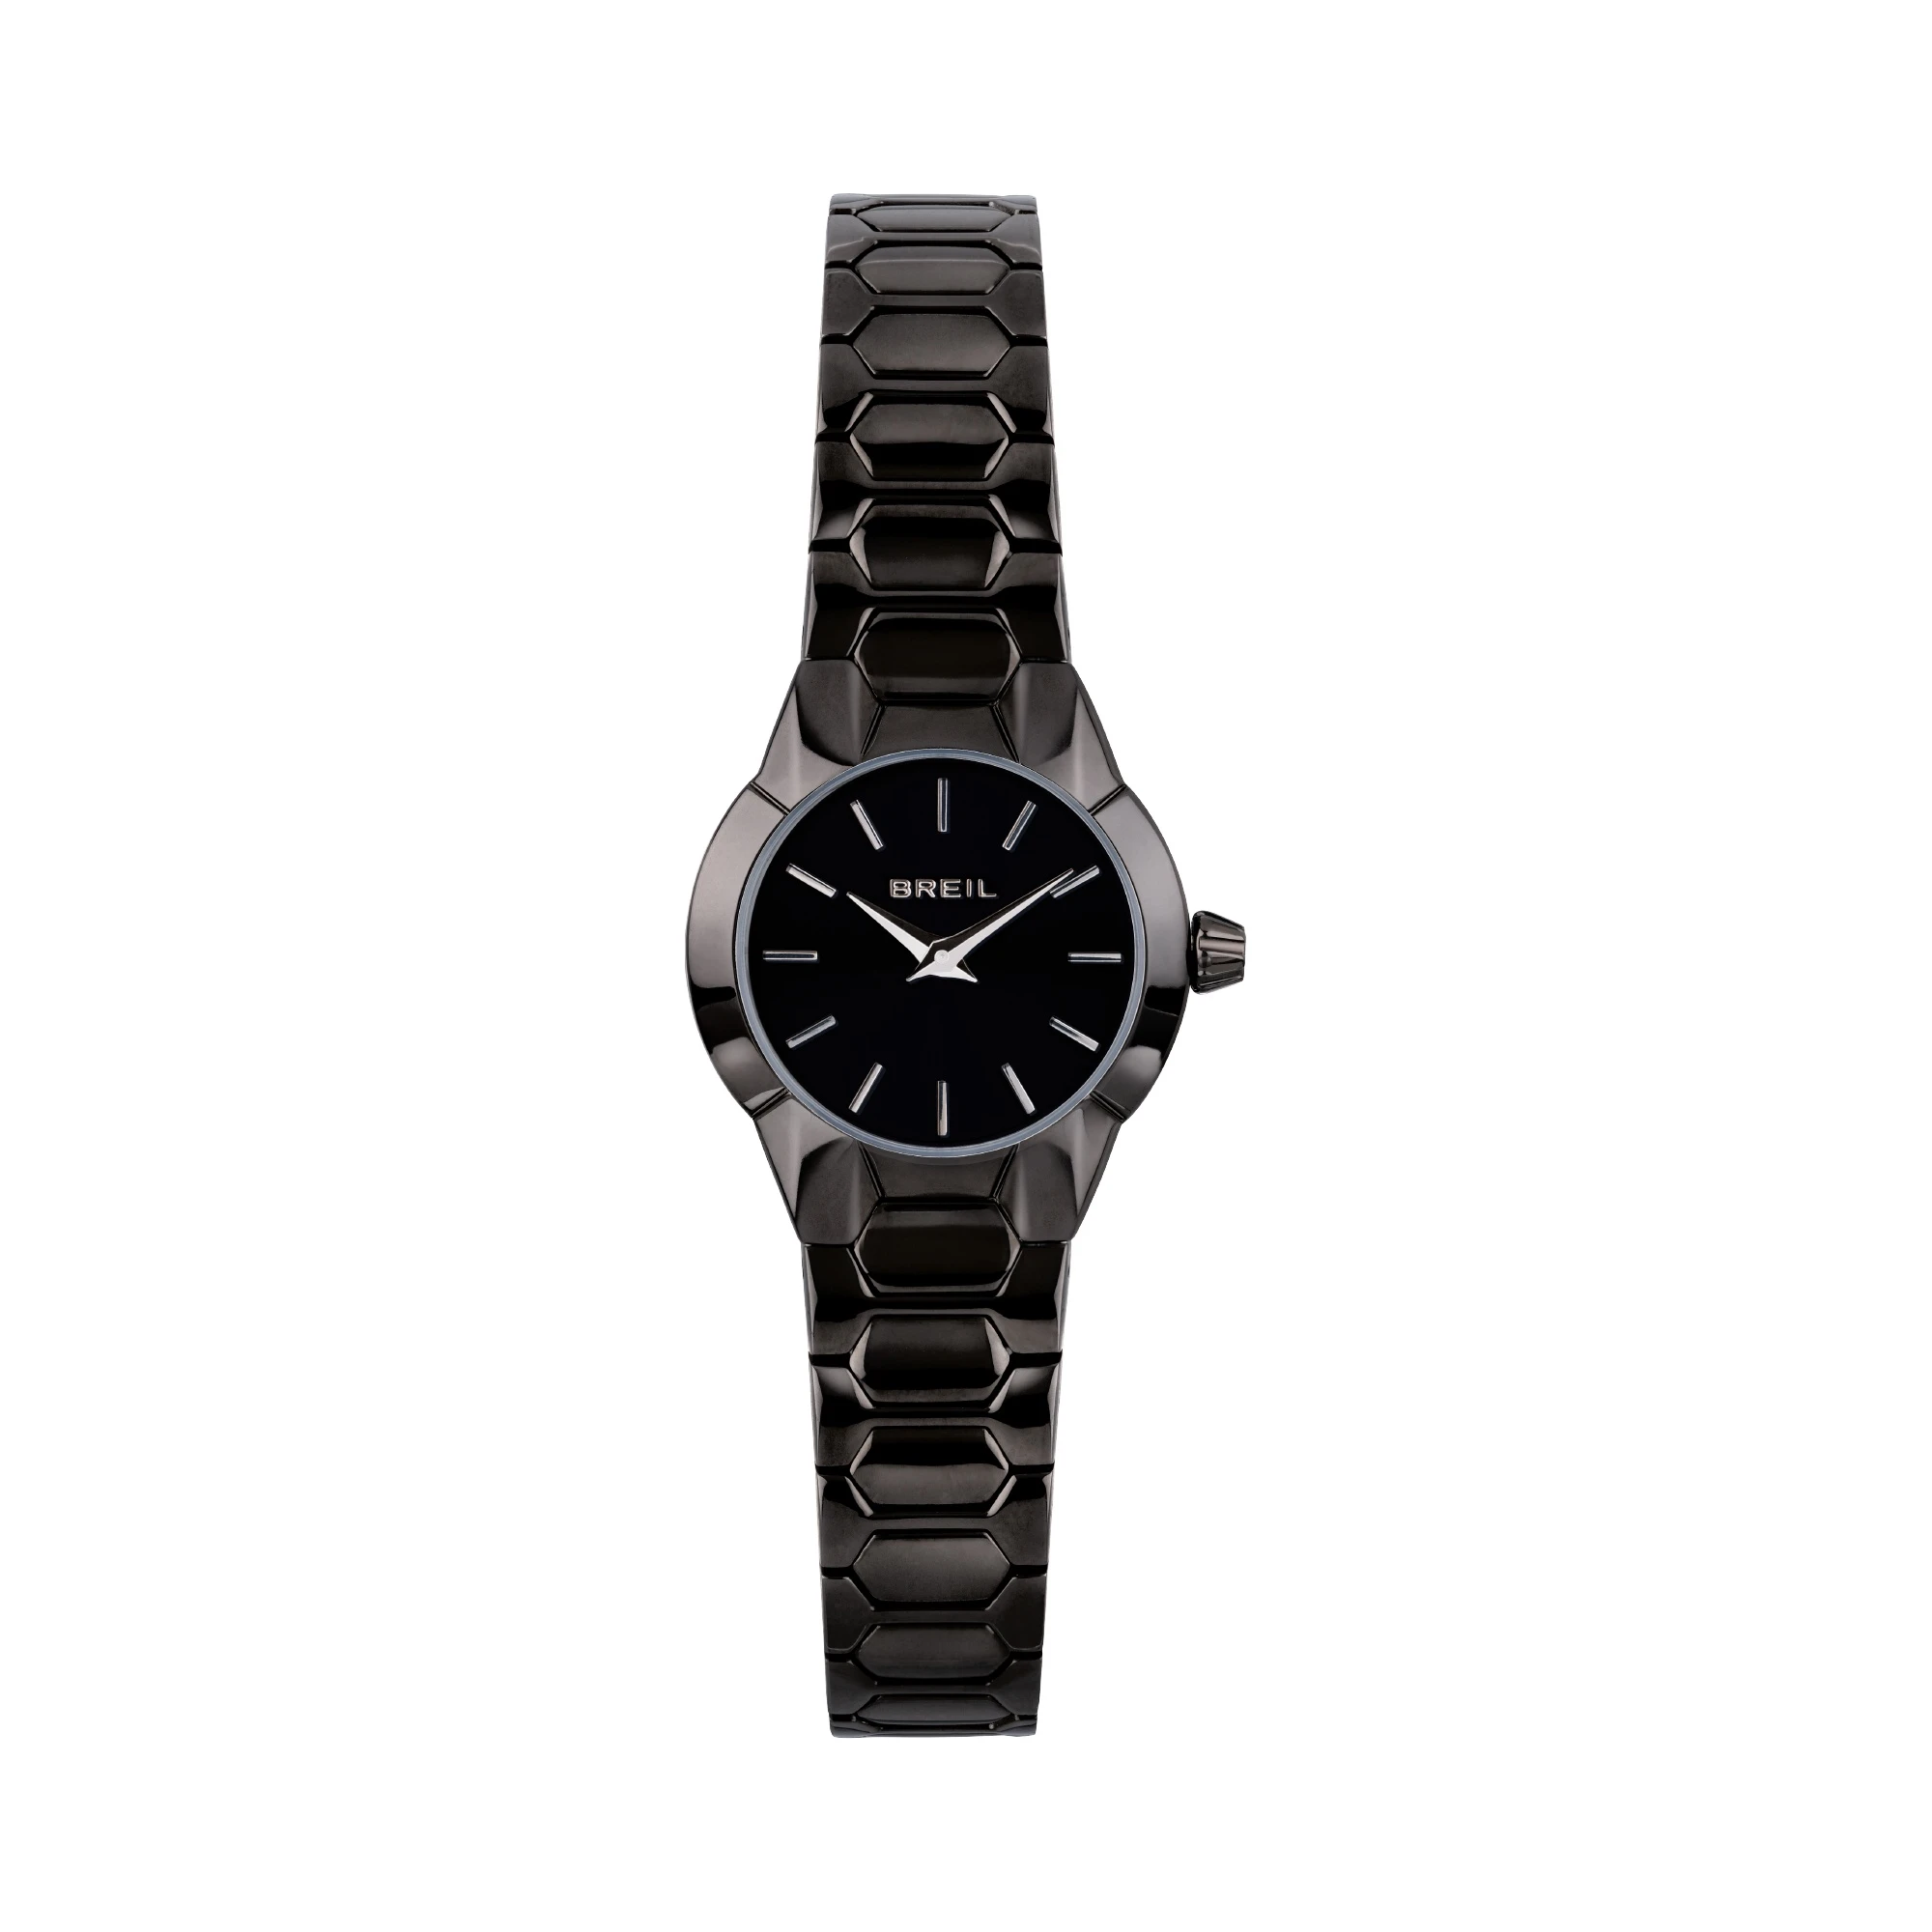 NEW ONE - SOLO TEMPO LADY 24 MM - 1 - TW1857 | Breil